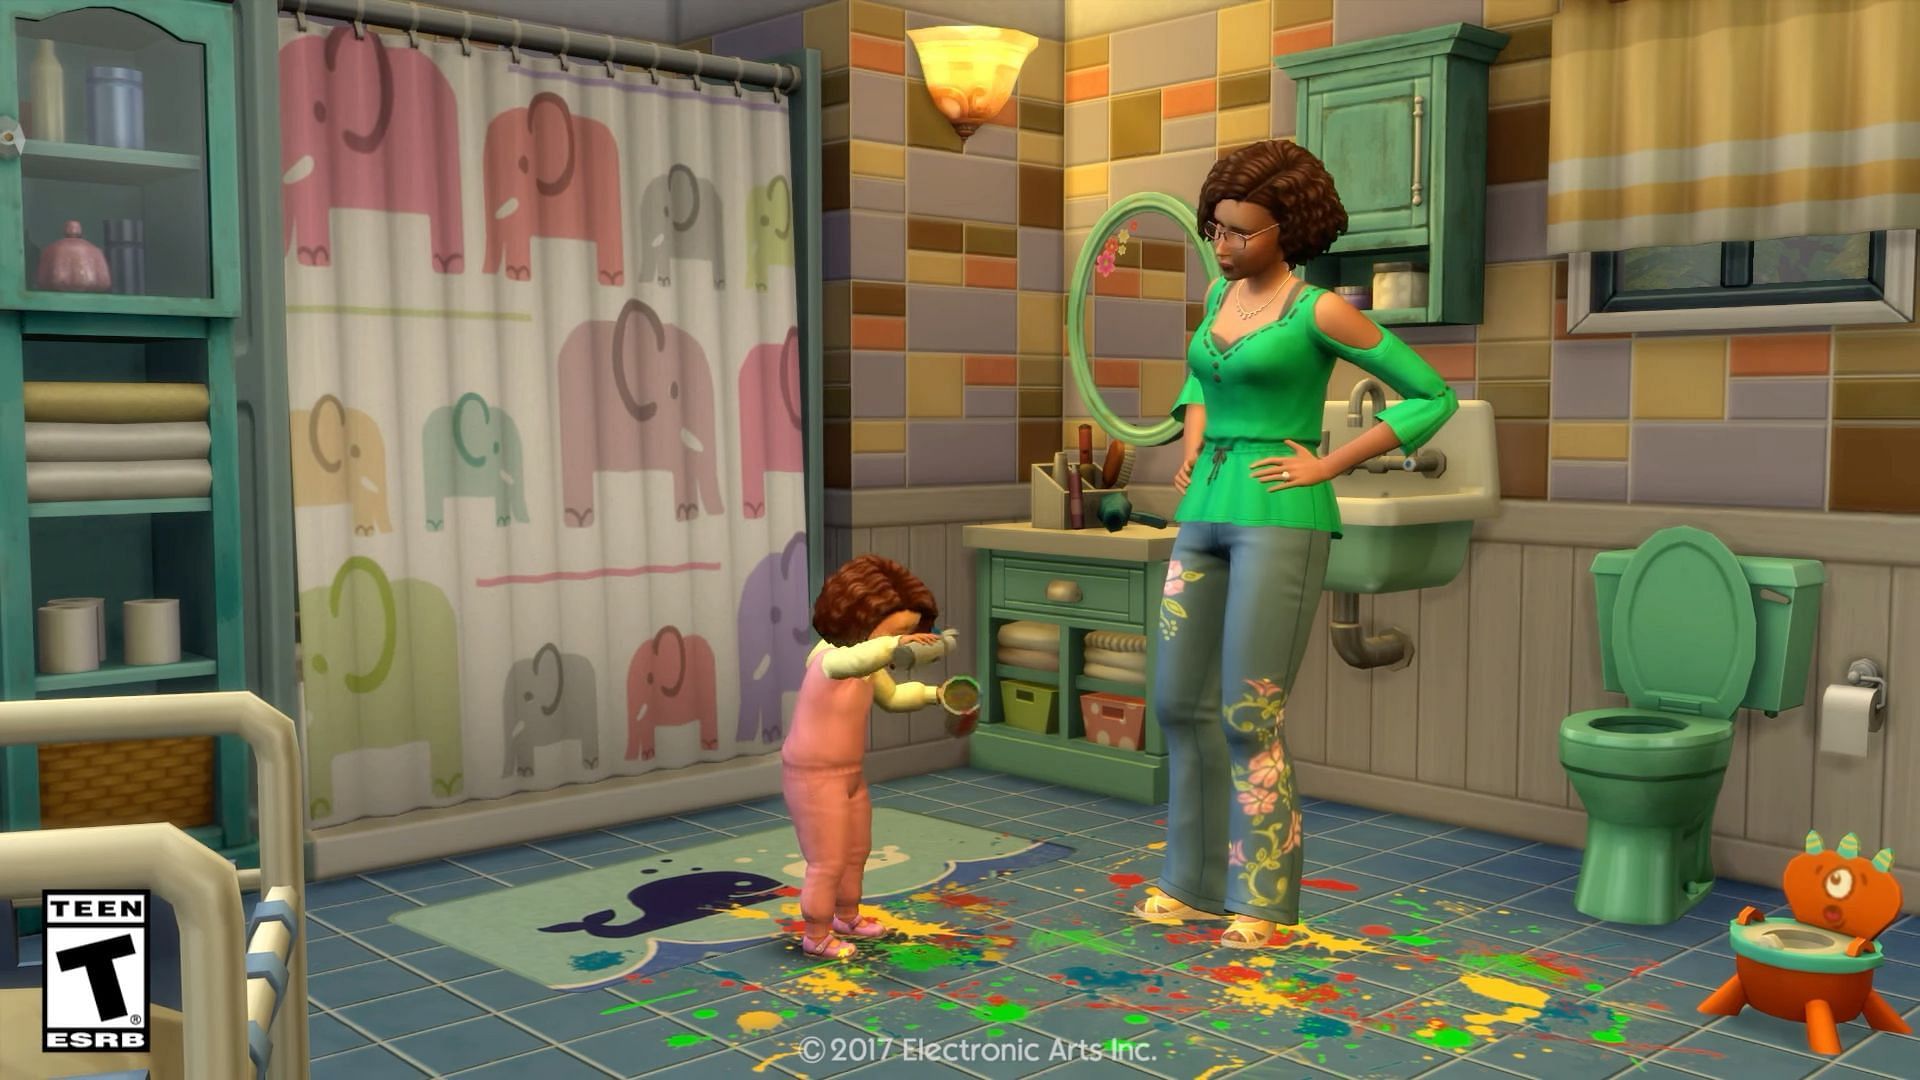 The Sims 4 pregnancy guide: What happens when a Sim gets pregnant? (Image via Electronic Arts)